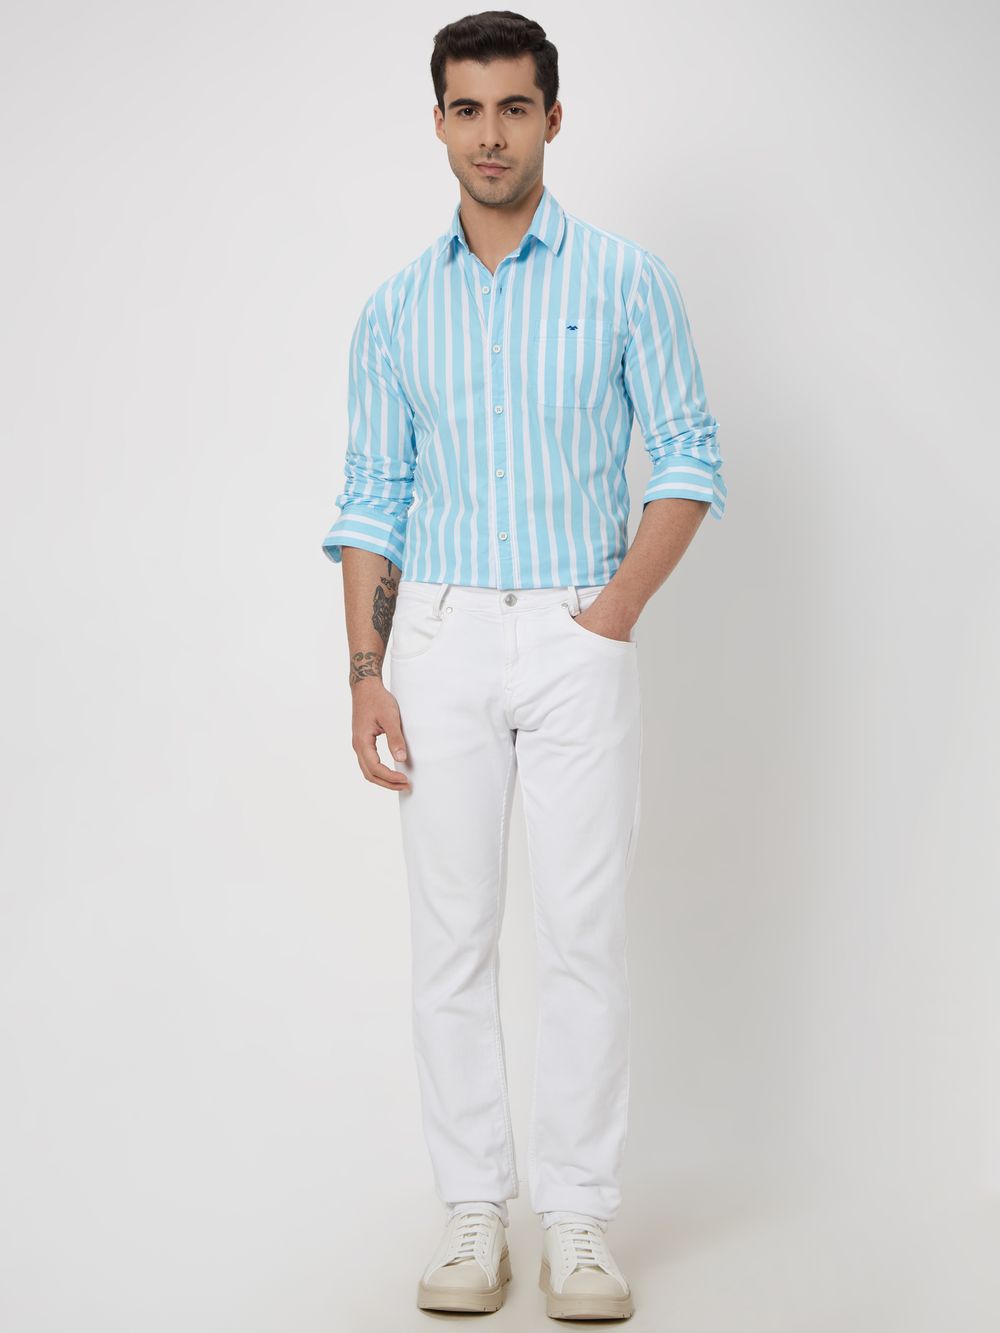 Turquoise & White Bengal Stripe Slim Fit Casual Shirt